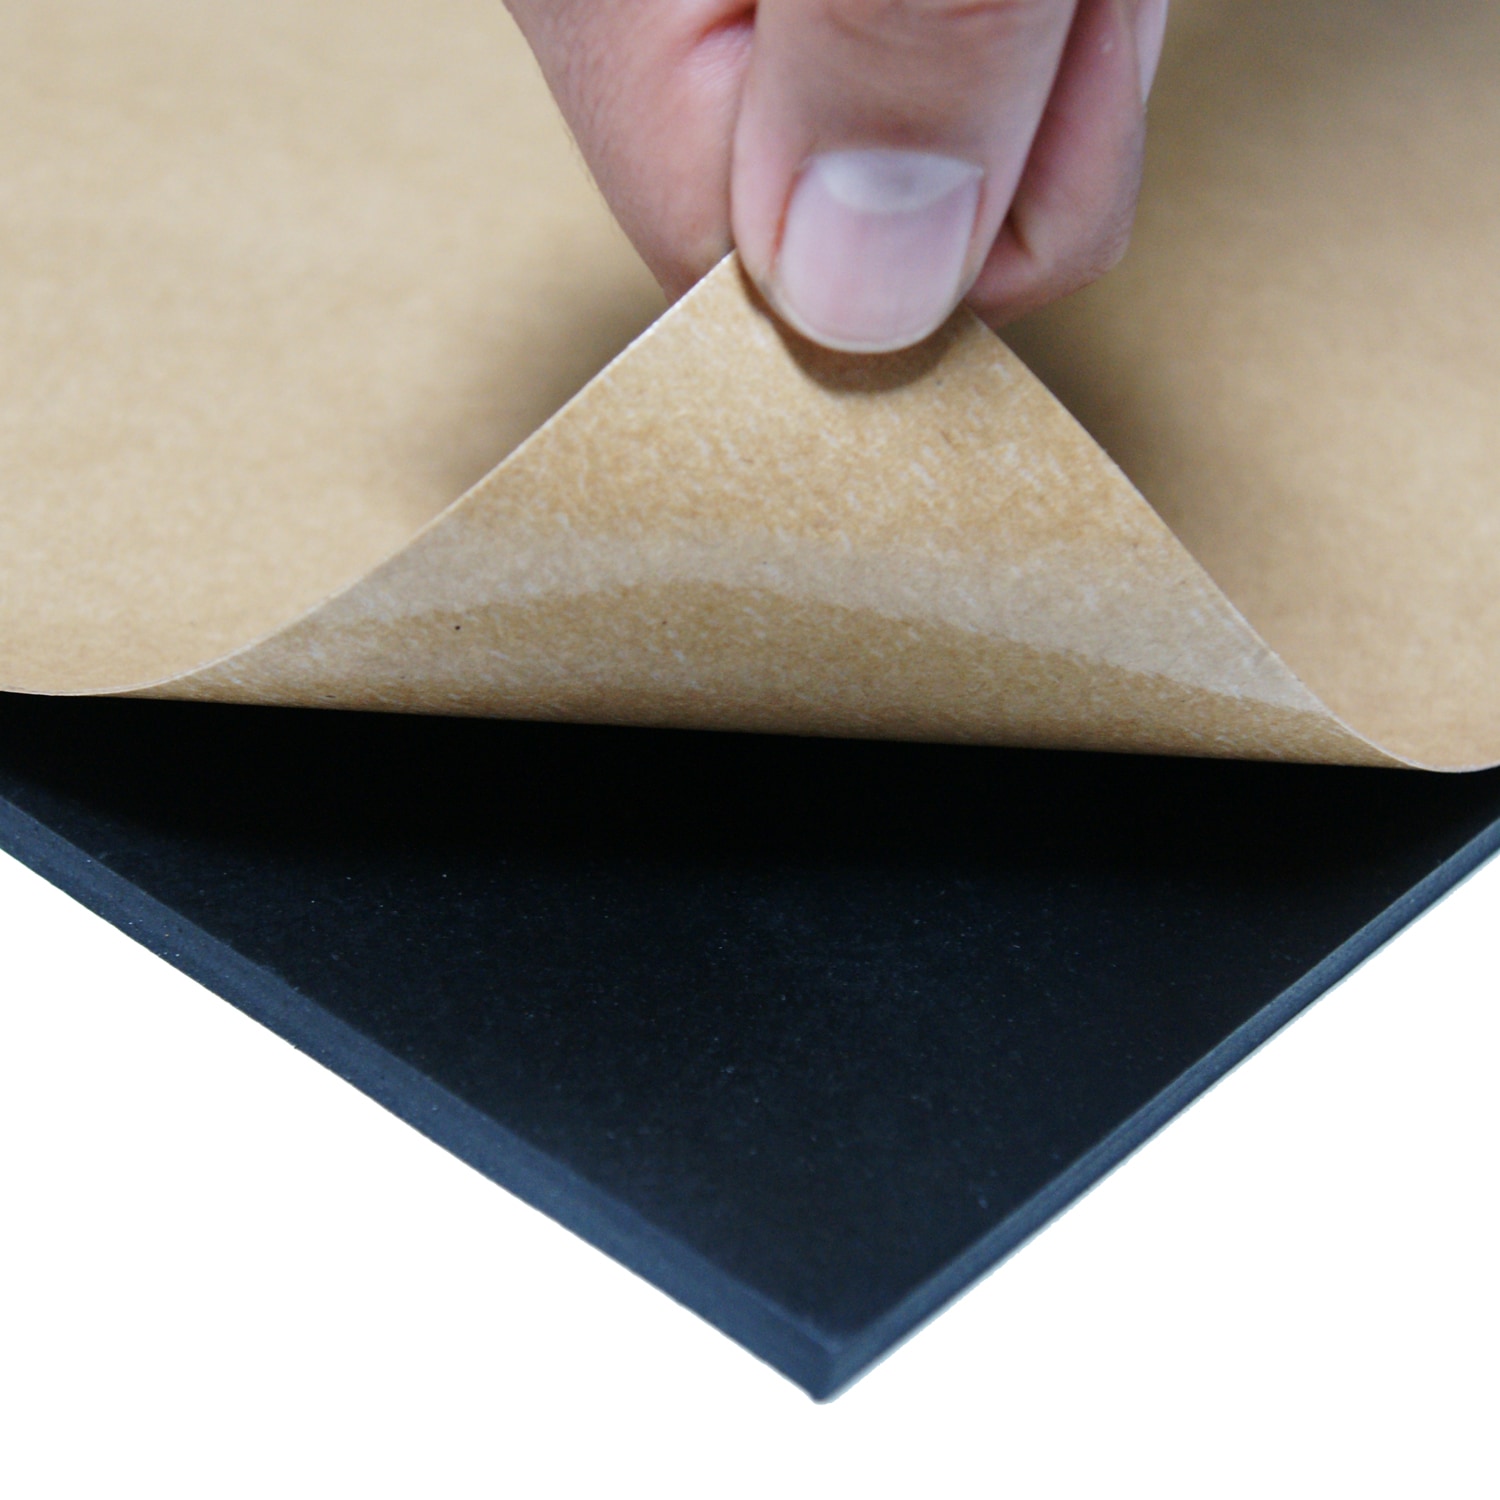 Top Reasons Why You Need Rubber Neoprene Pads & Materials